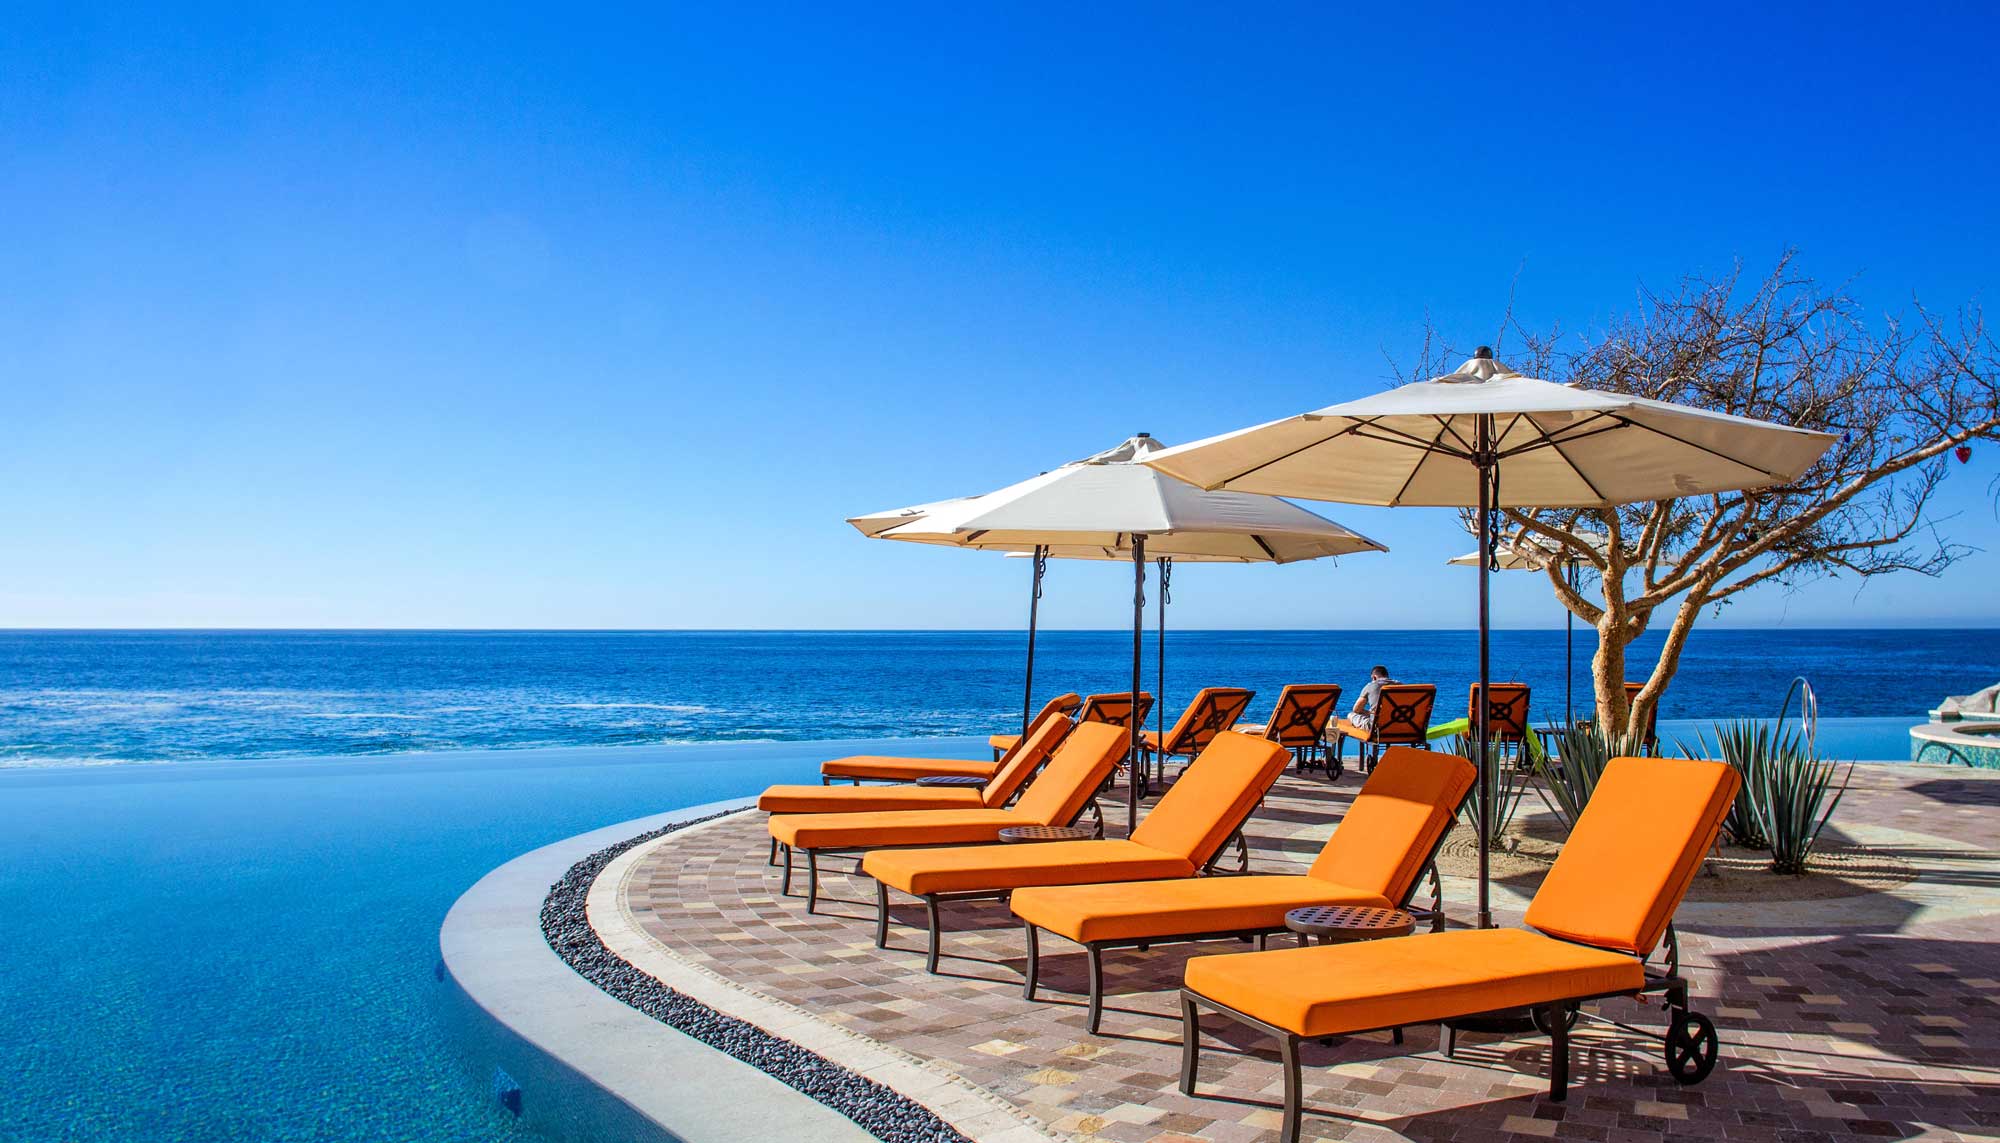 Best All-Inclusive Resorts in Pacific Mexico | All-Inclusive Weddings & Honeymoons | Puerto Vallarta Resorts | Grand Solmar Land’s End Resort & Spa, Cabo San Lucas